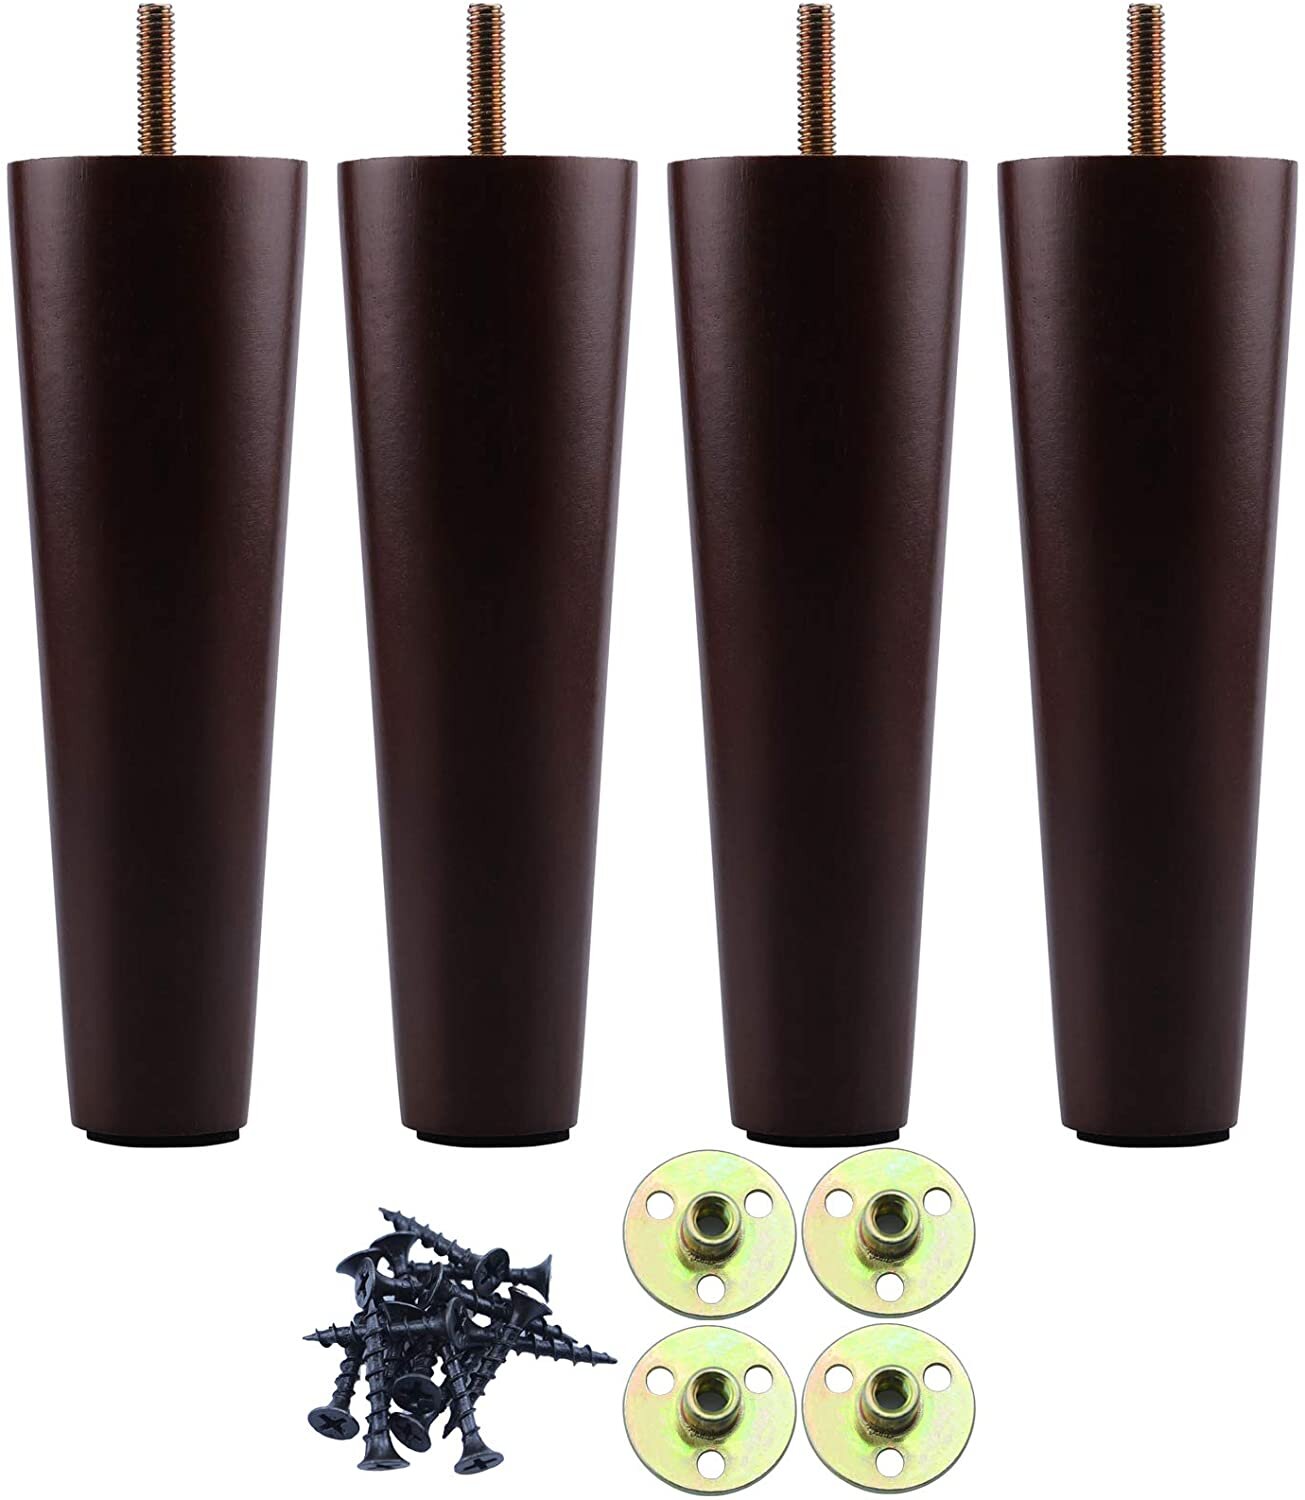 4PCS Brown Furniture Legs Feet Riser Replace Chair Couch Bed Table Feet